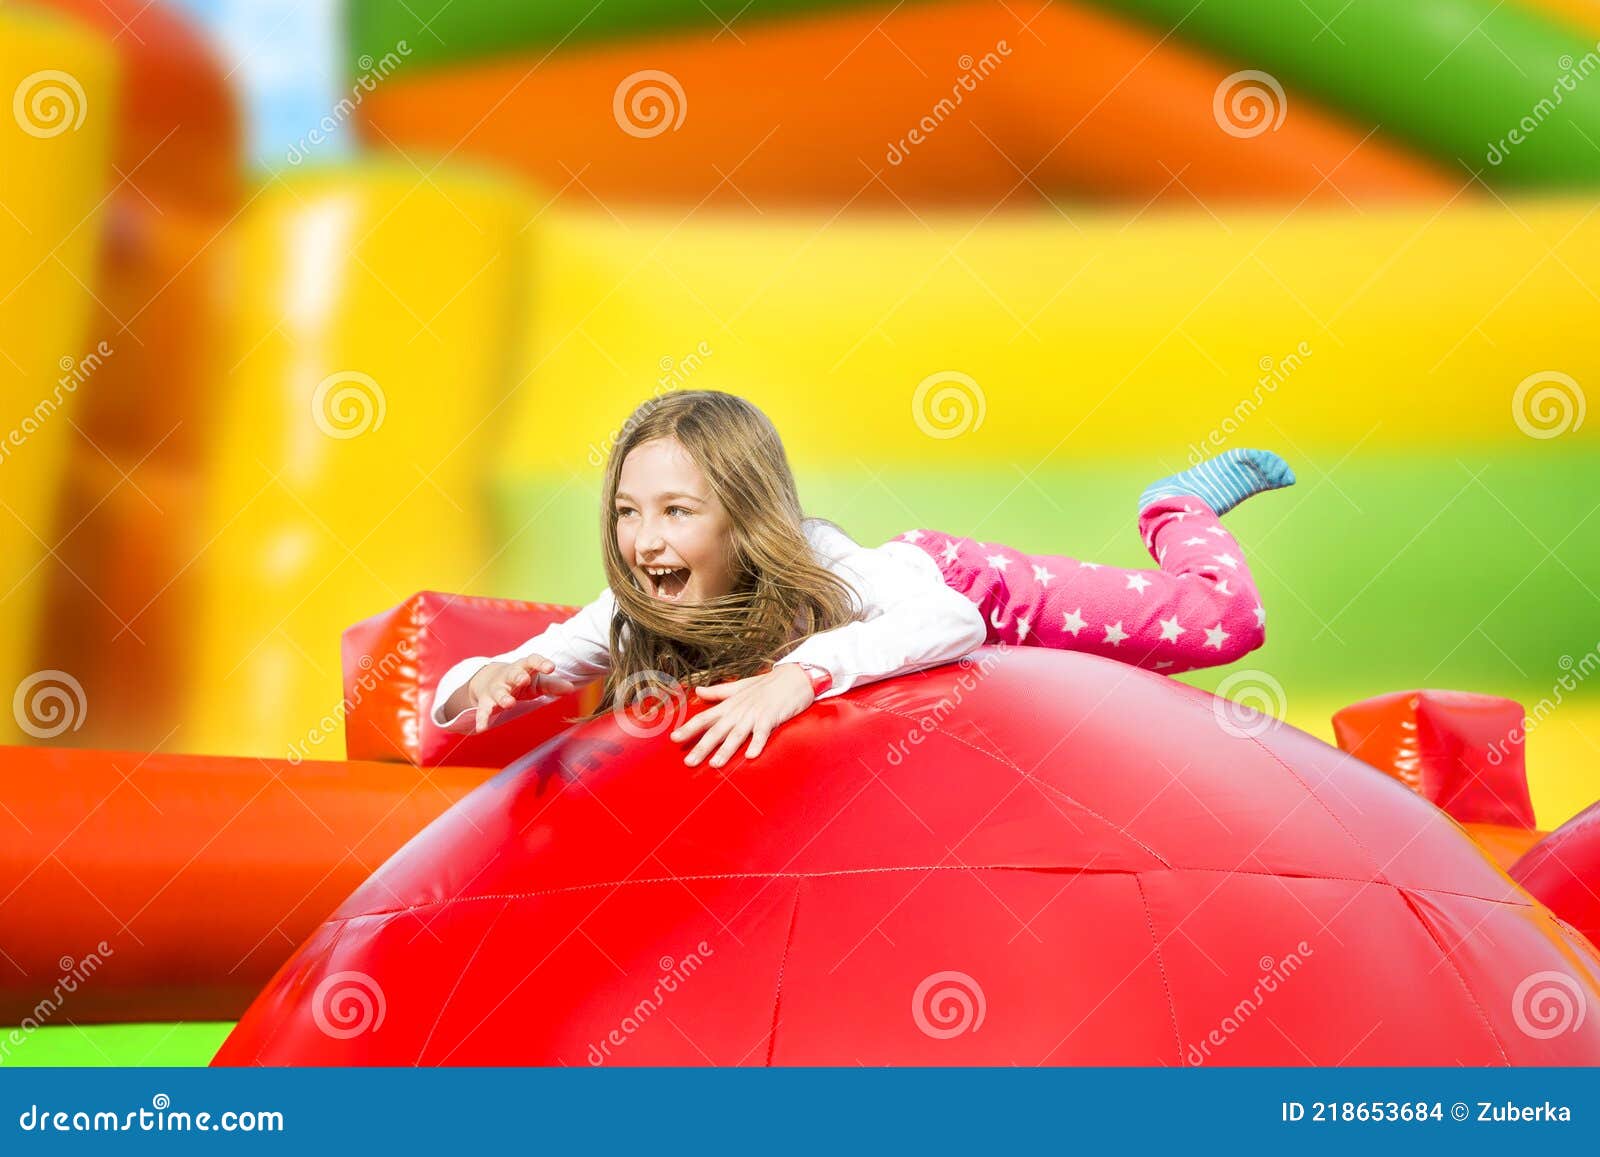 happy girl on the playground inflate castle